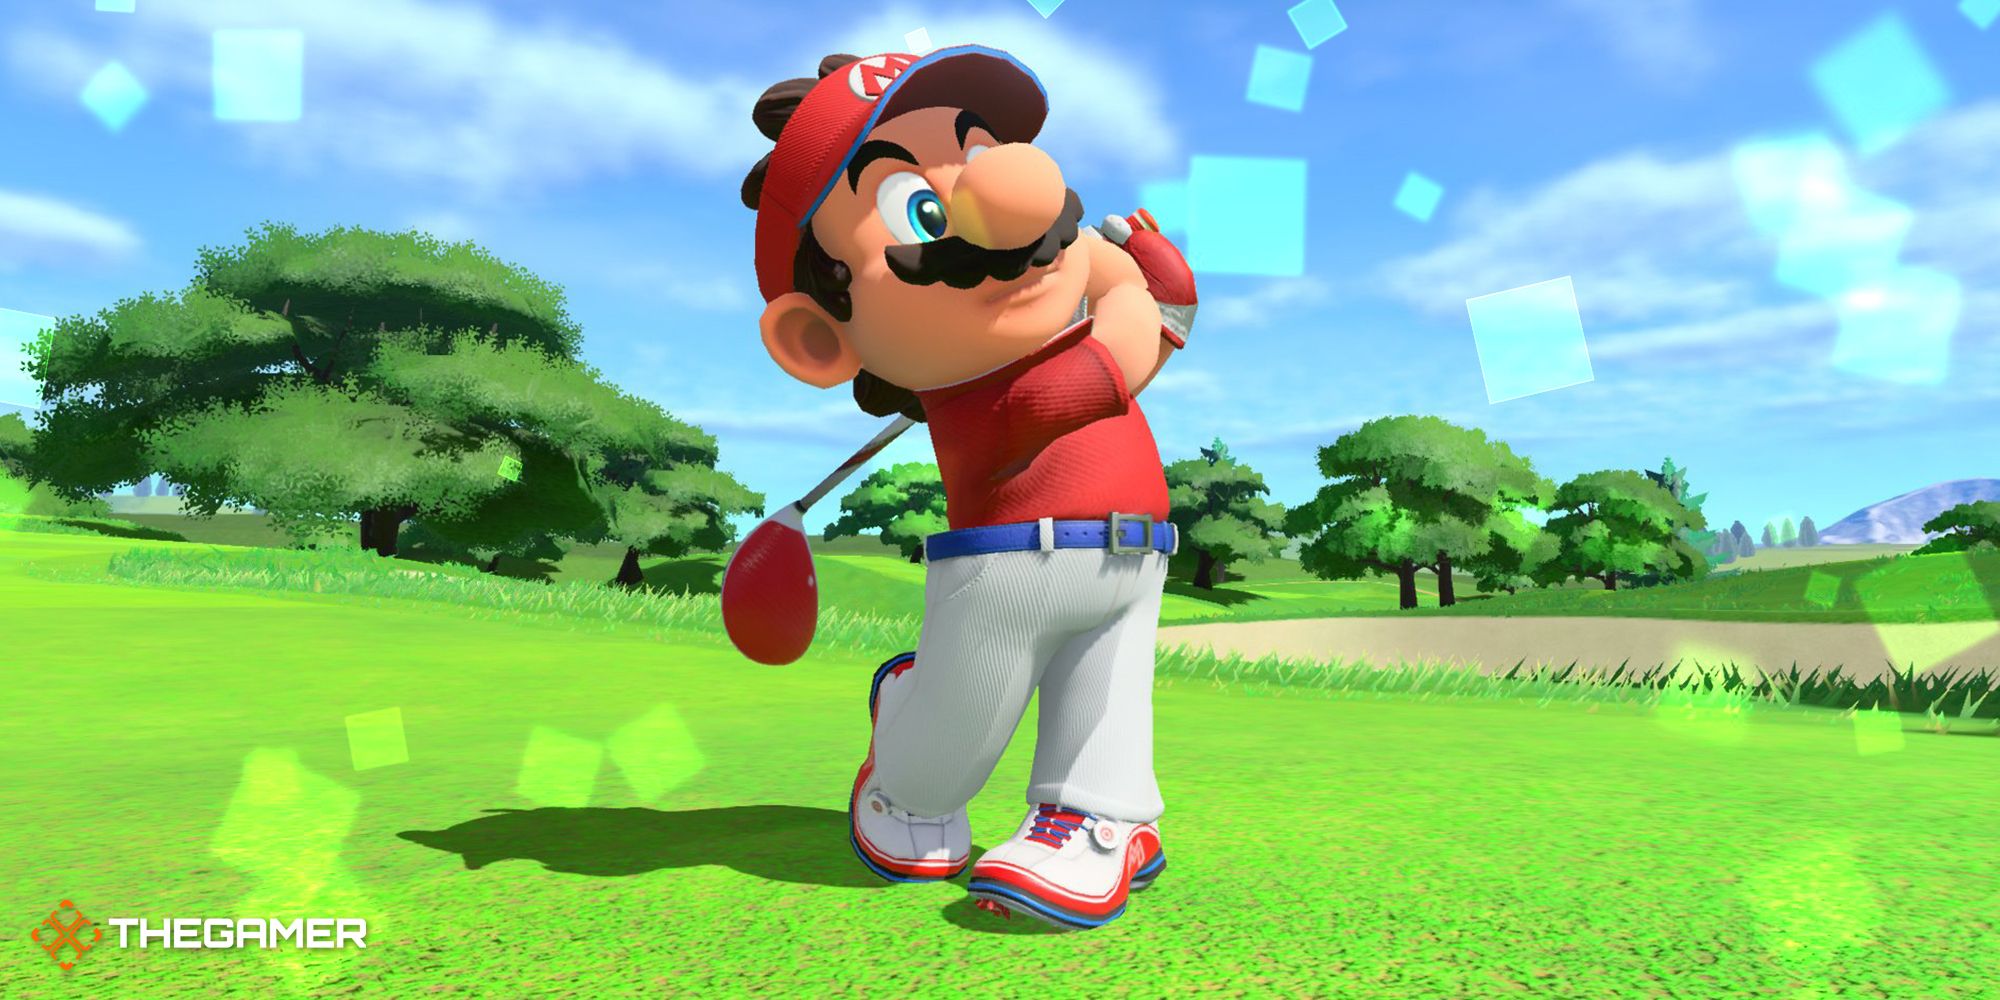 How fast can you touch grass in every Mario game?, Touch Grass